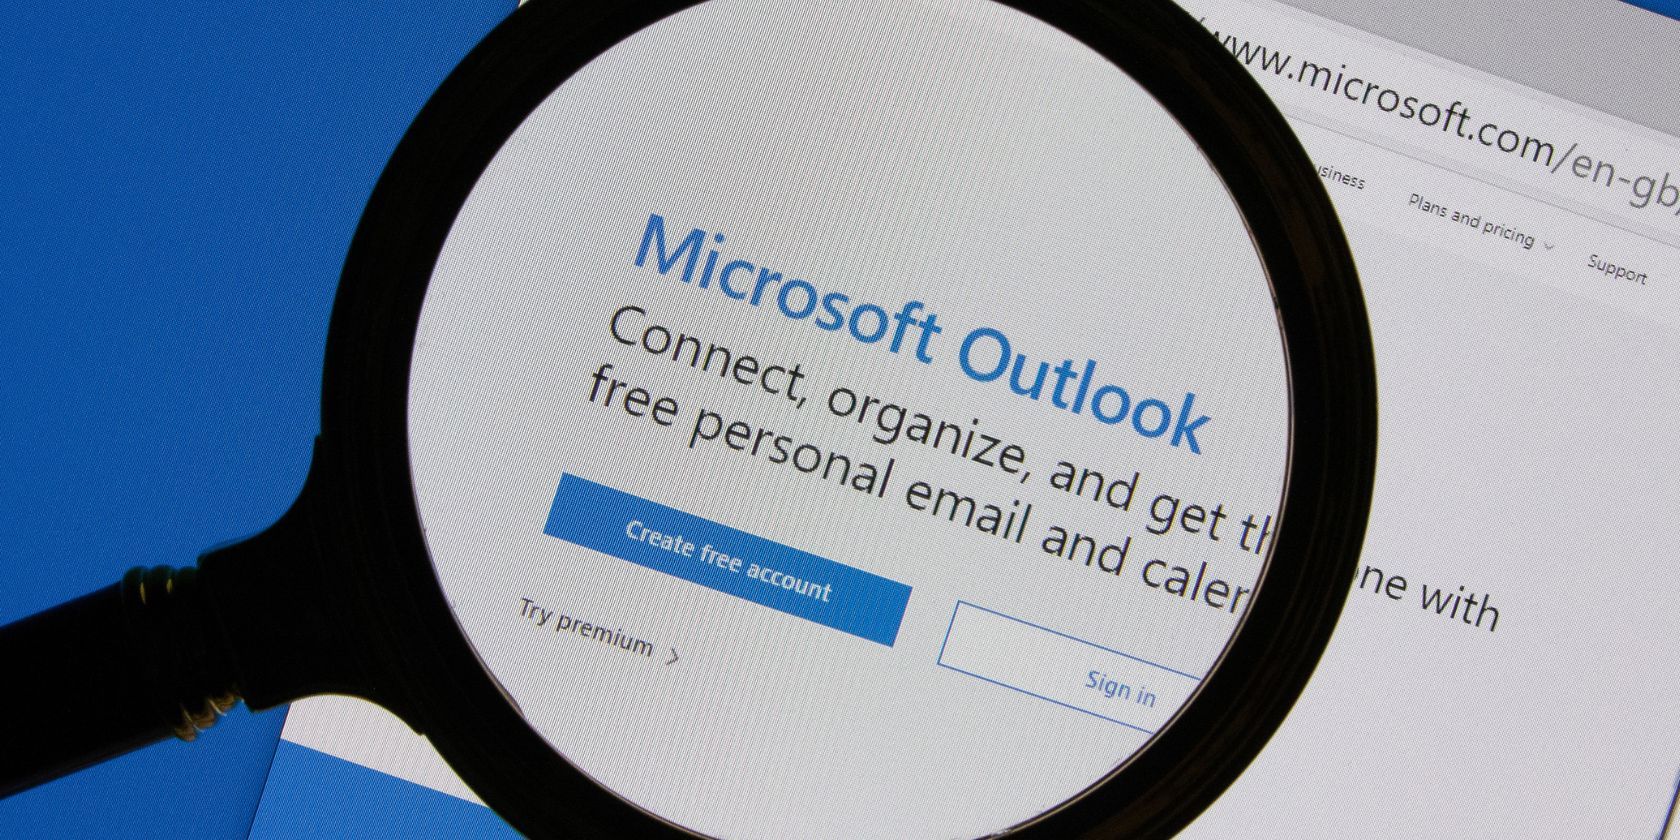 microsoft outlook login page being looked at with magnifying glass